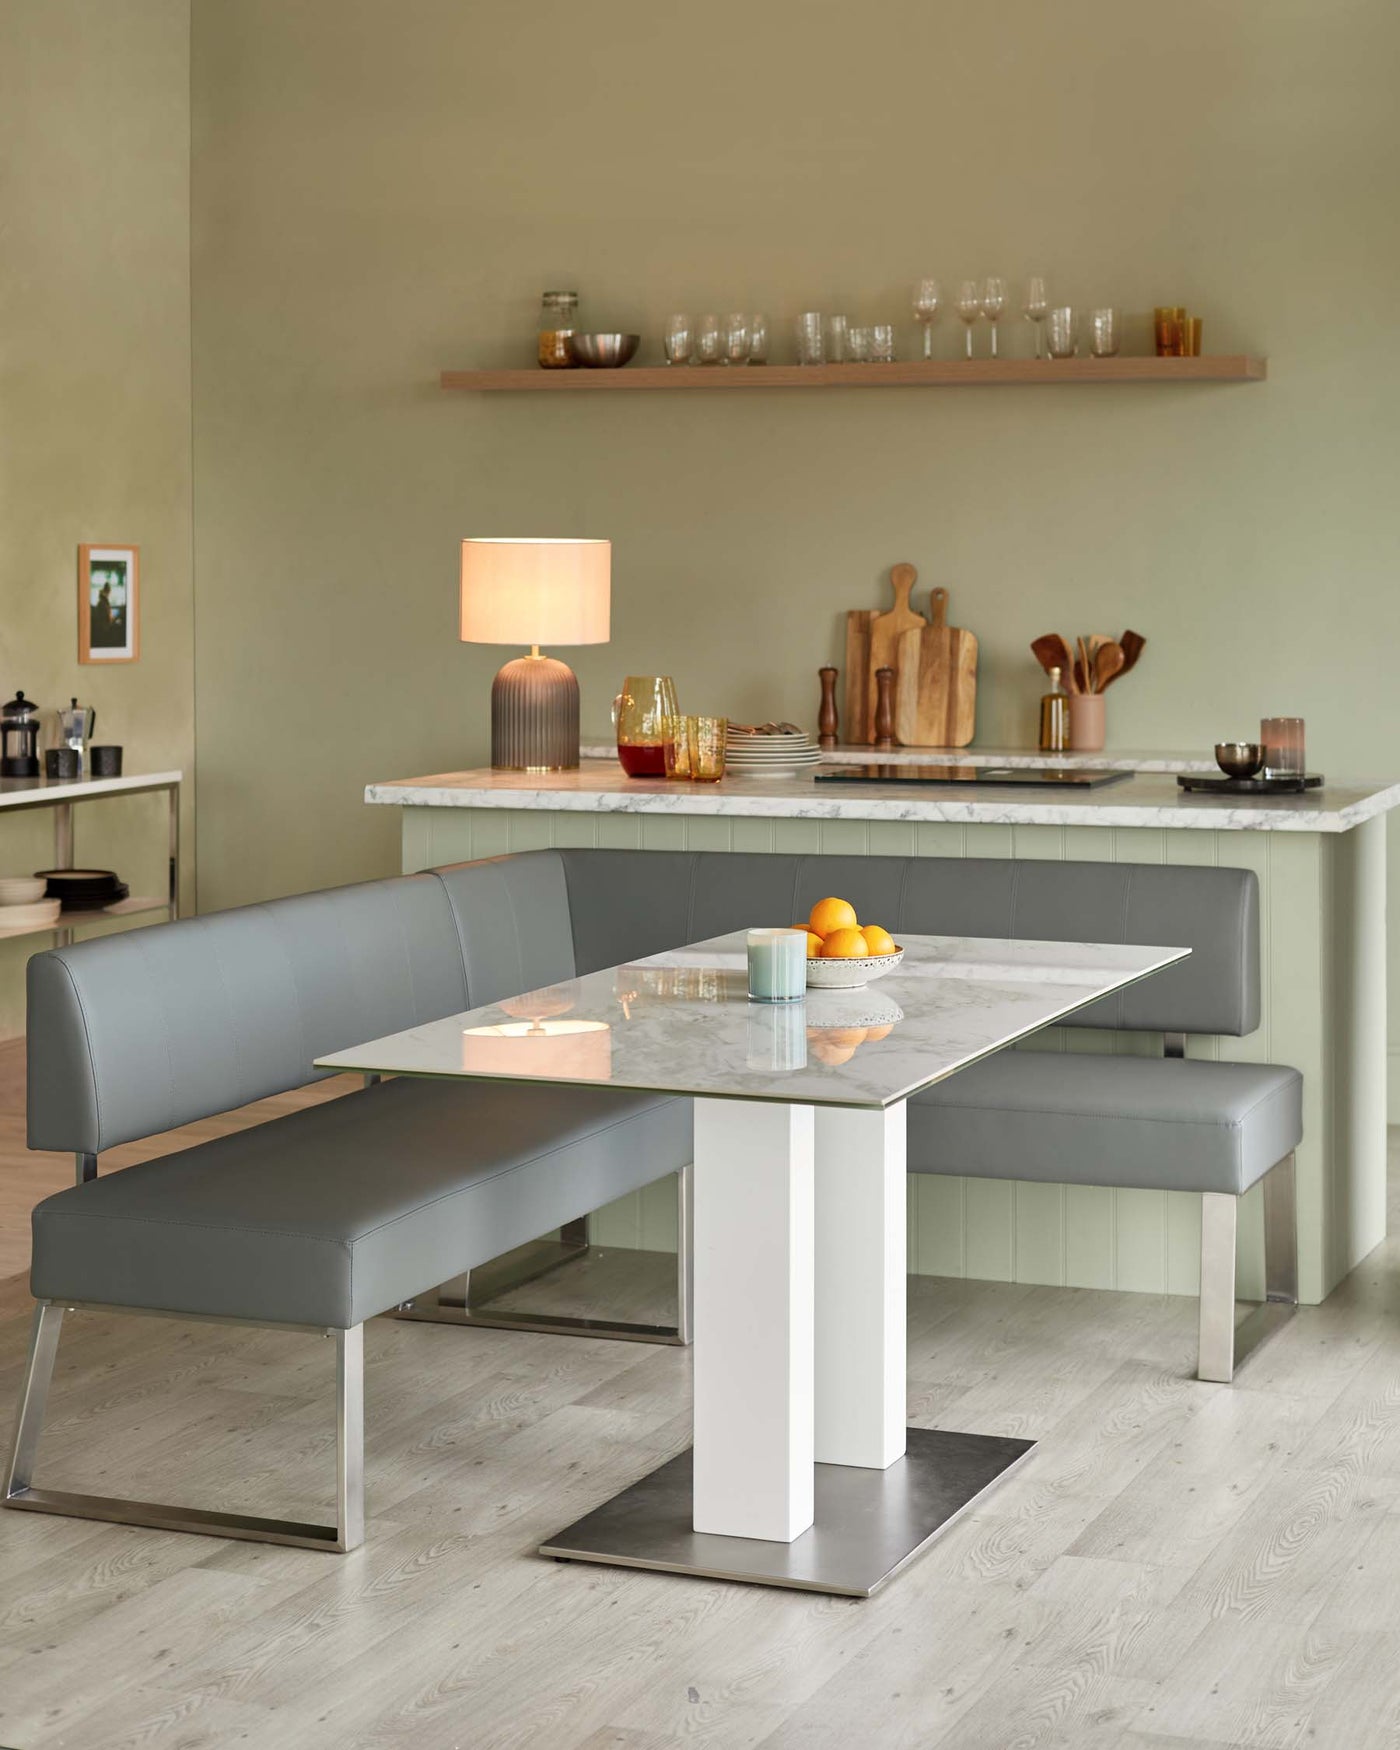 Modern dining set featuring a rectangular marble-top table with a white and stainless steel base, paired with a grey upholstered L-shaped bench and a matching grey upholstered bench, all positioned on a light wooden floor.